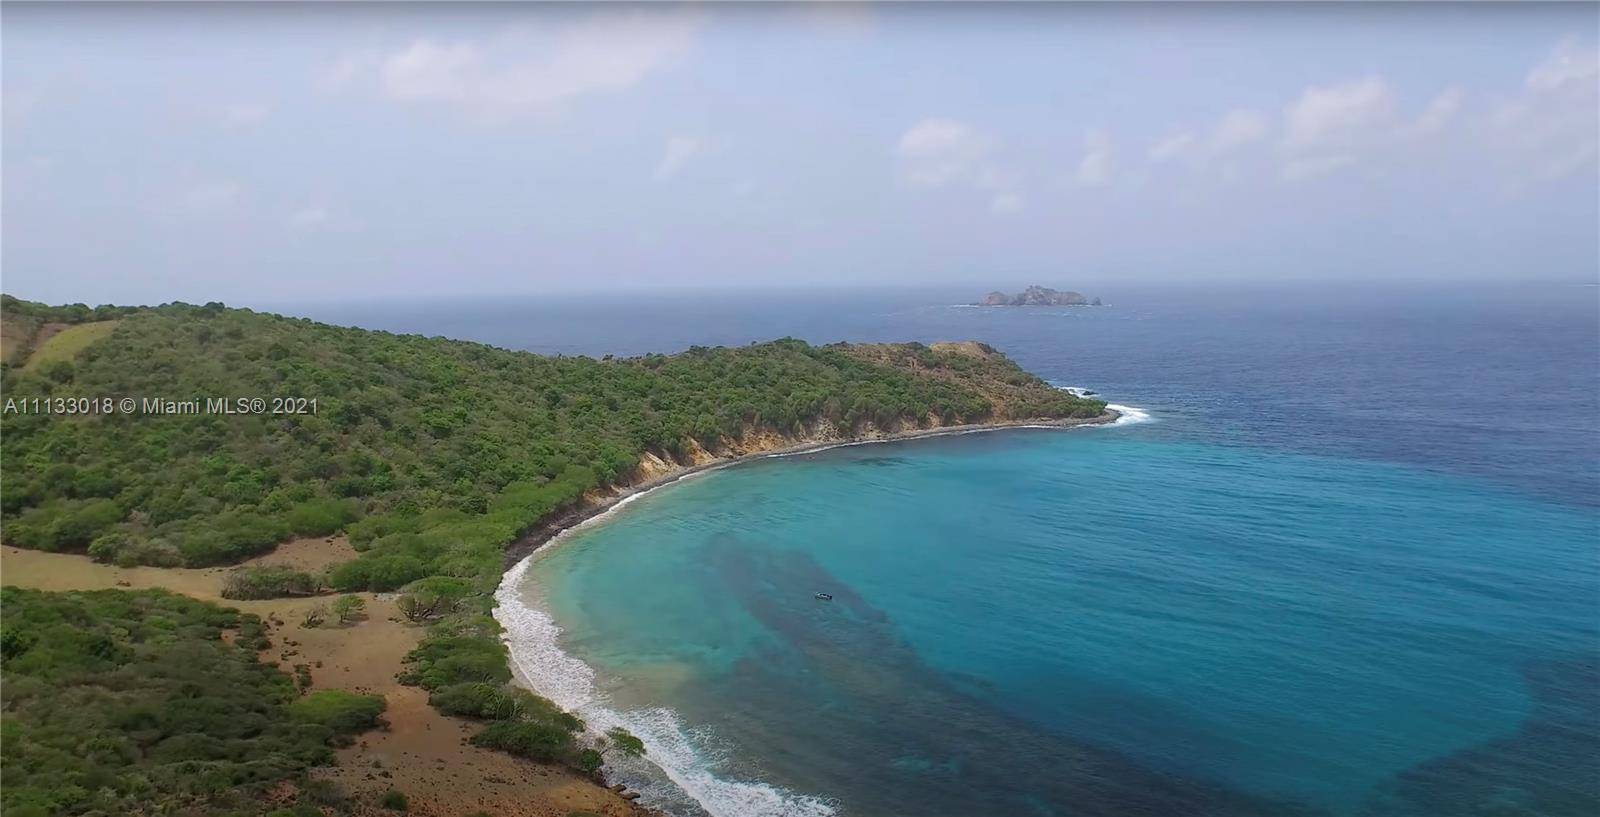 Baliceaux is a small, privately owned Caribbean island and is one of the Grenadines chain of islands which lie between the larger islands of Saint Vincent and Grenada.